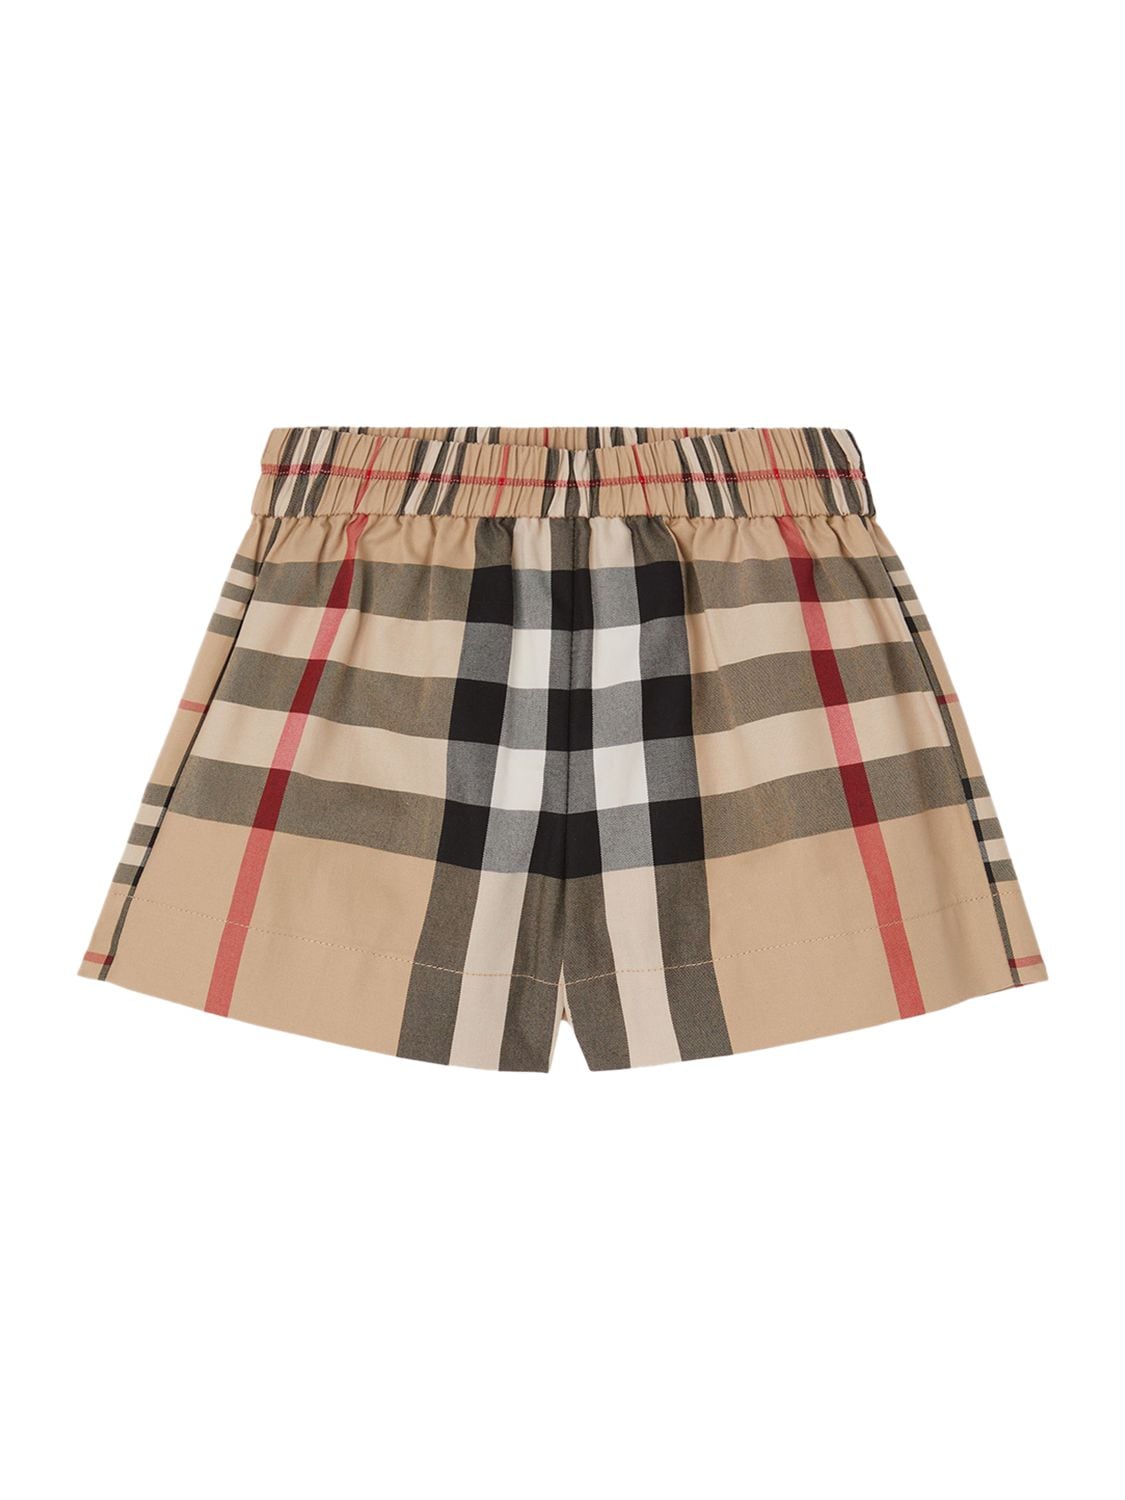 Burberry Kids' Check Print Cotton Shorts In Beige,black